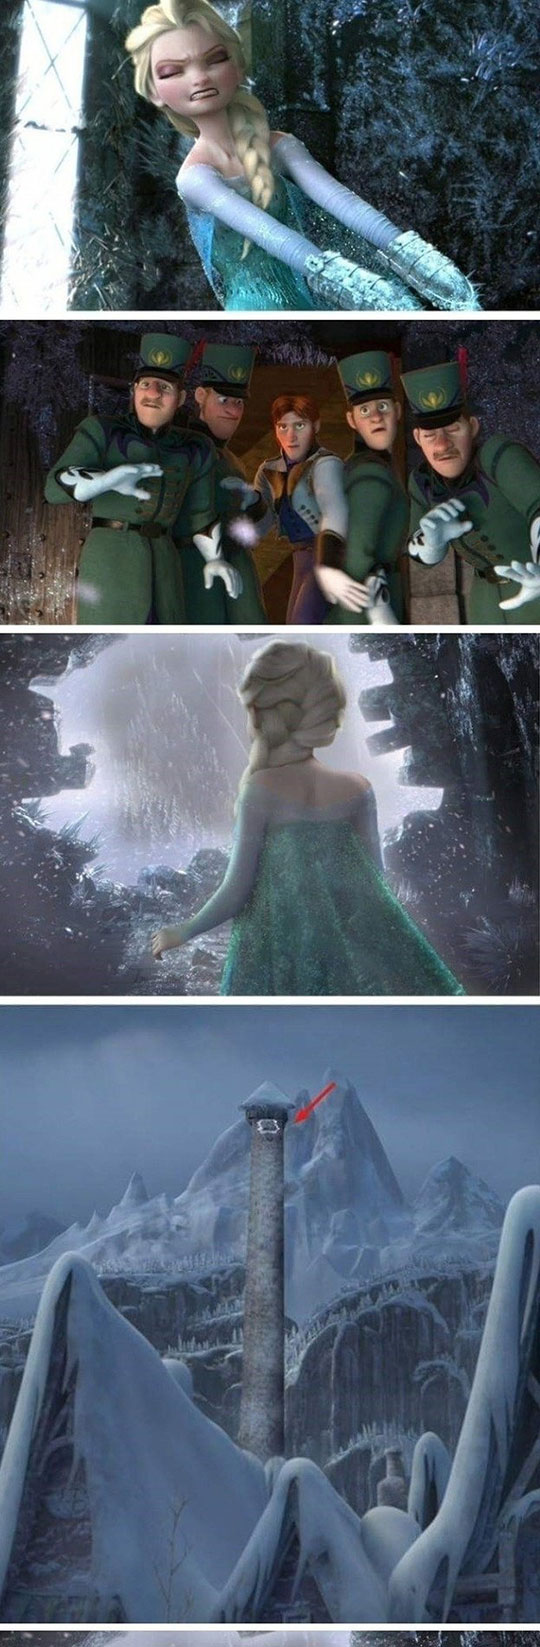 A New Frozen Has Arrived